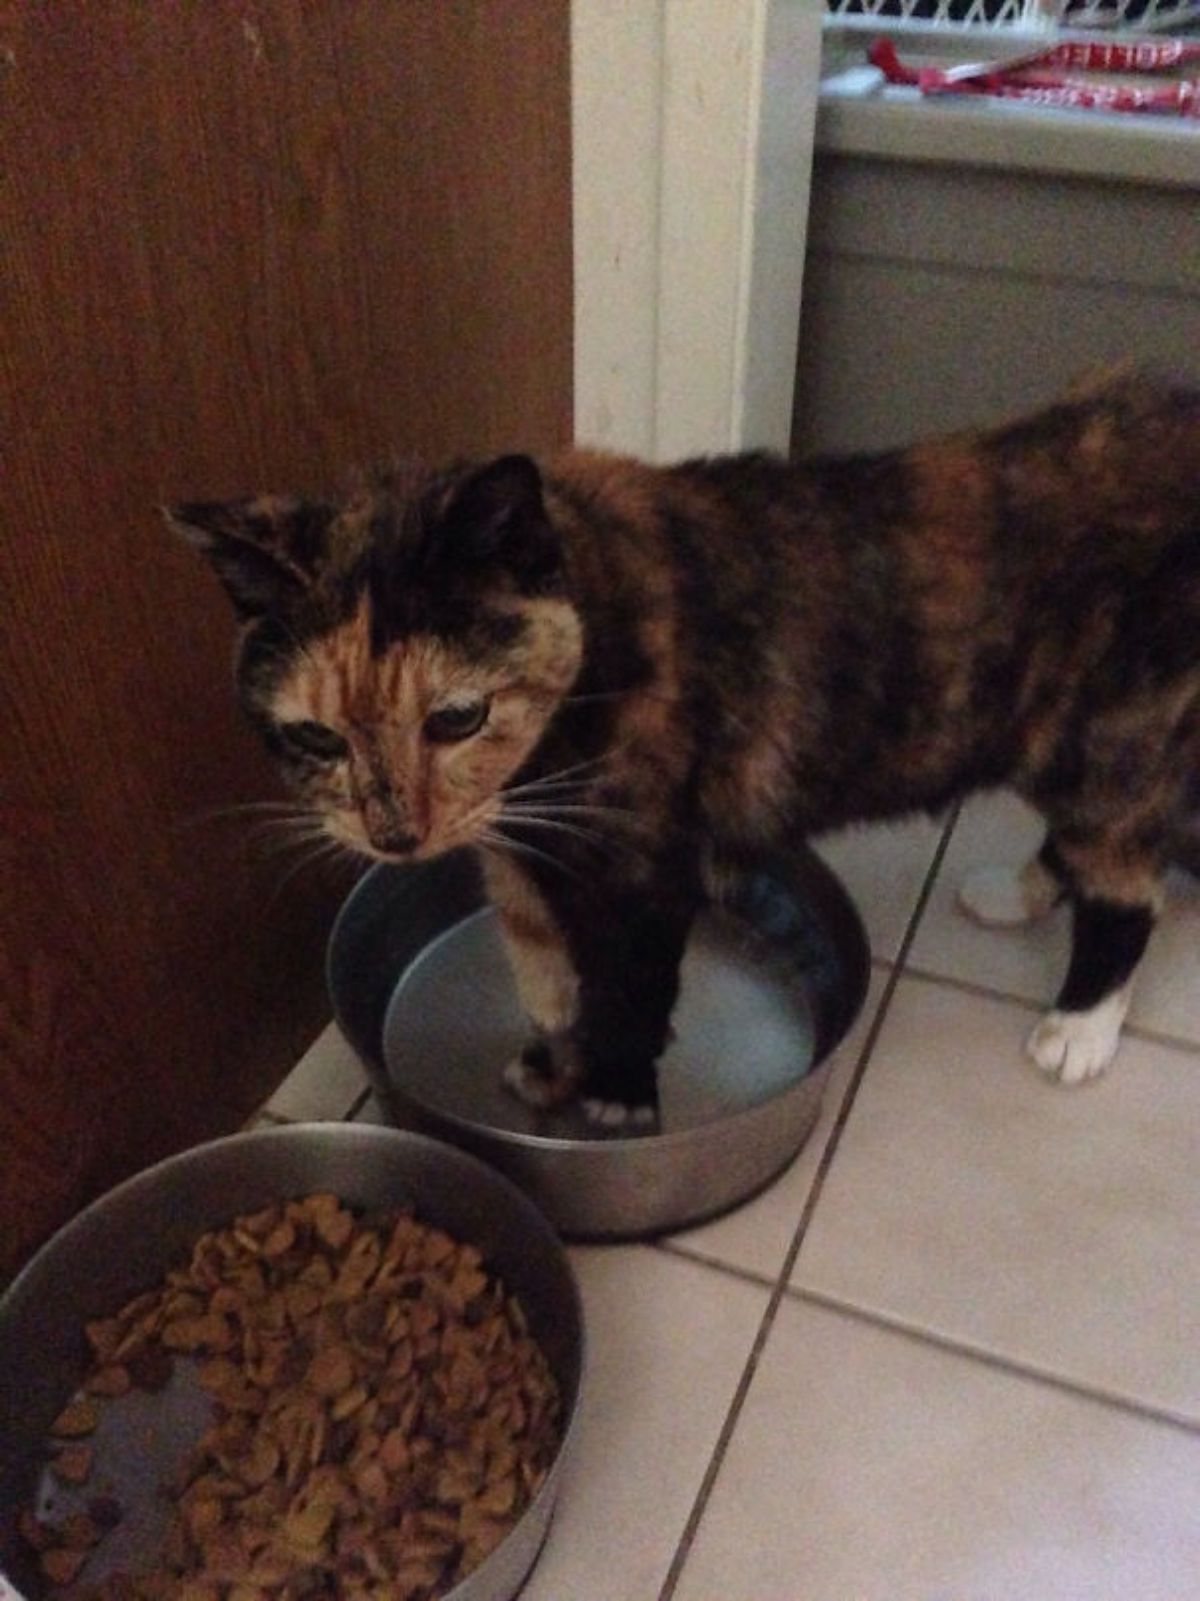 black orange and white cat standing with the front legs inside a dog's water bowl